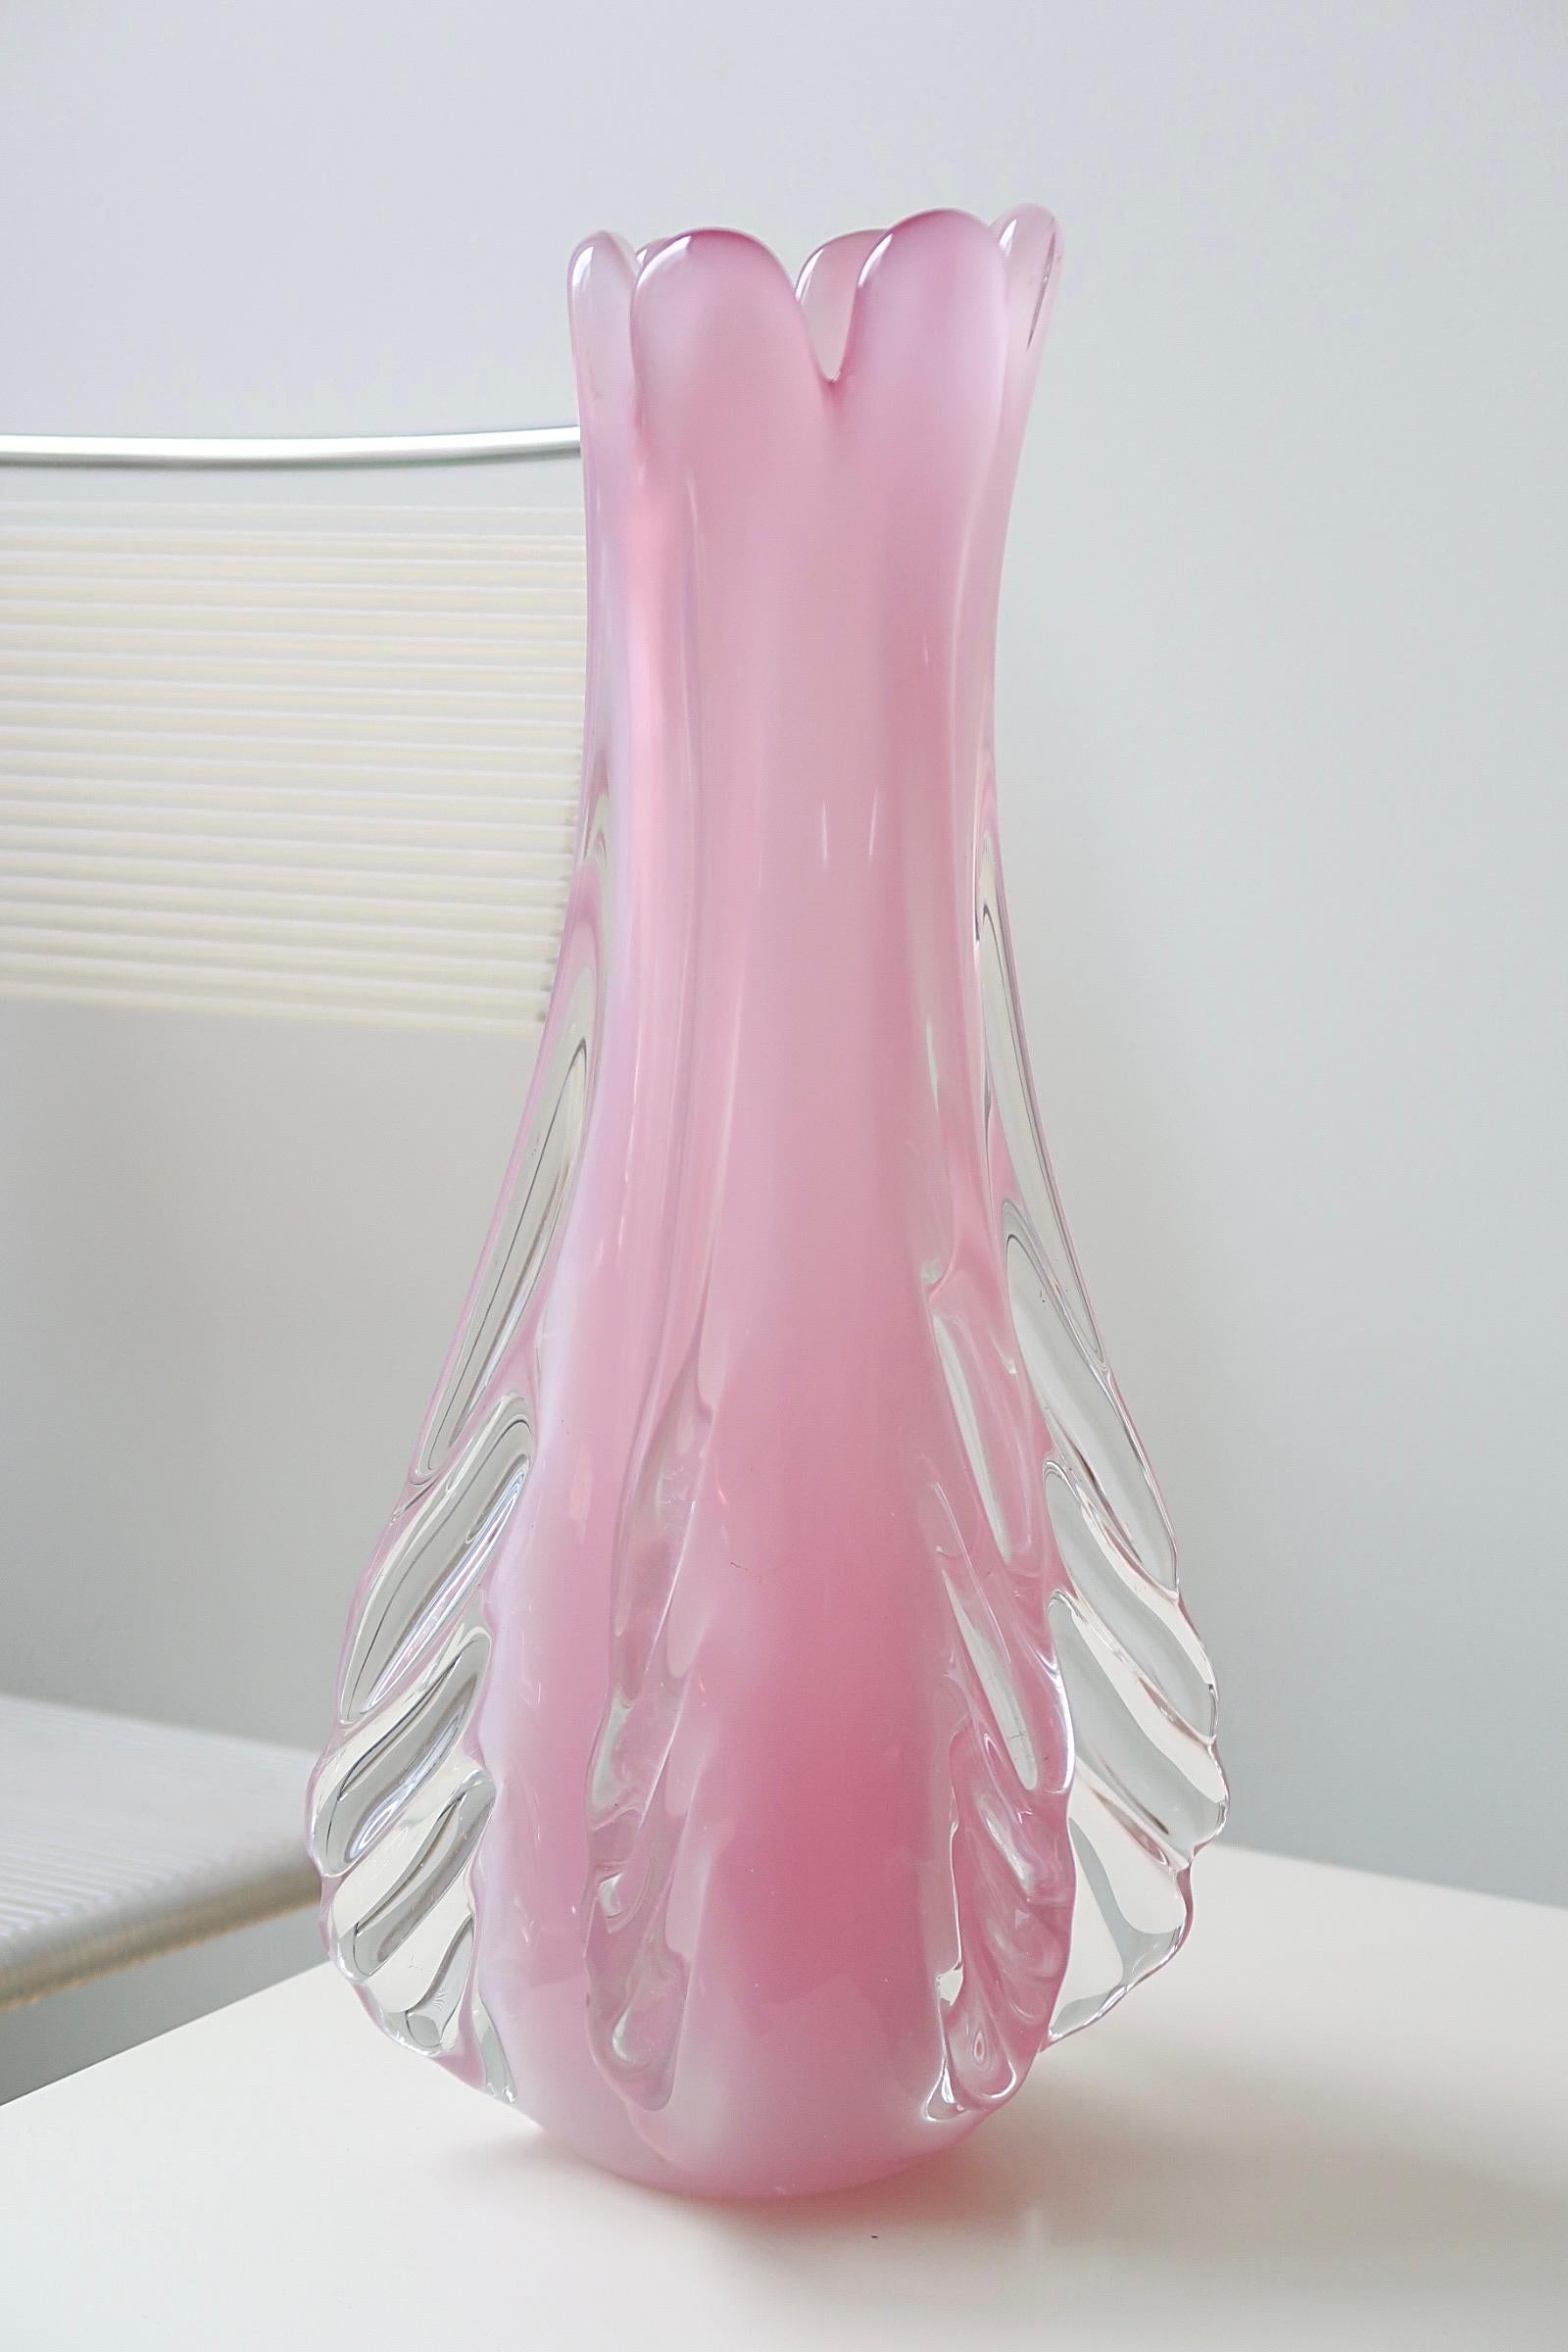 Large Vintage Murano Pink Ribbed Alabastro Opal Vase Mouth Blown Italian, 1960s 2